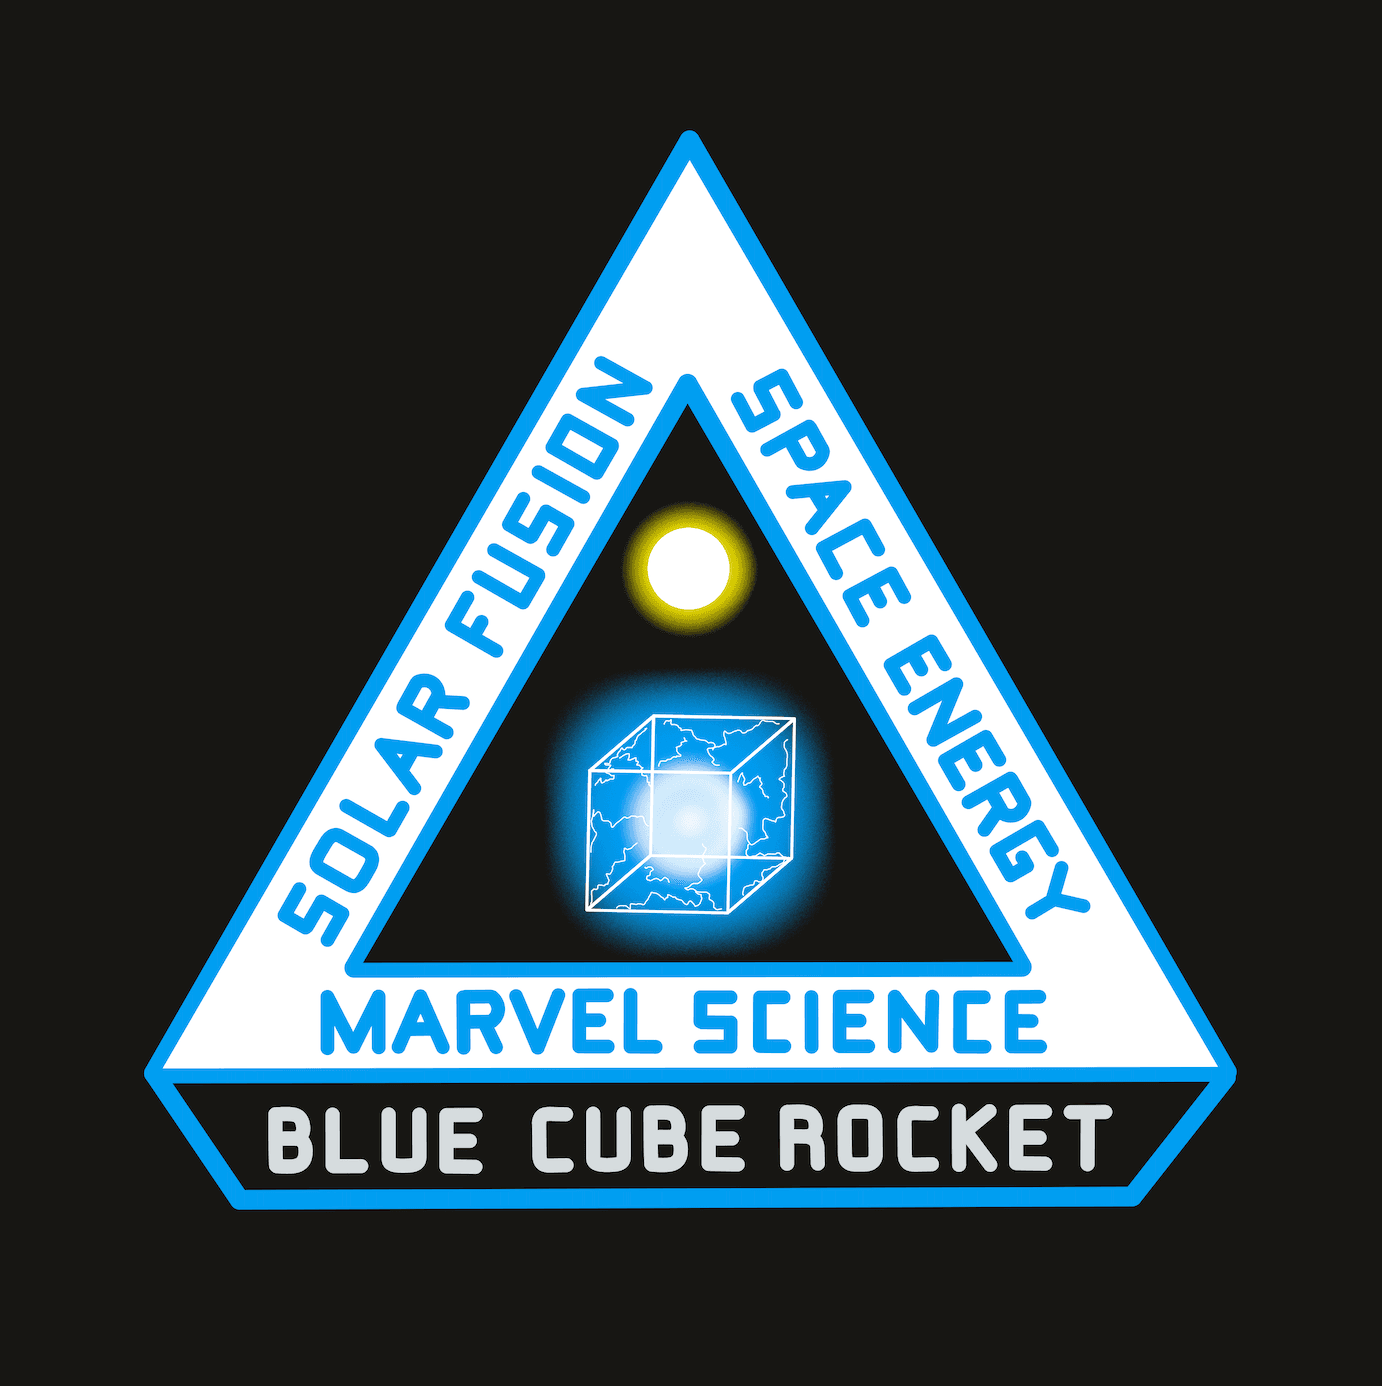 Star Cube Patch: "Marvel Science"